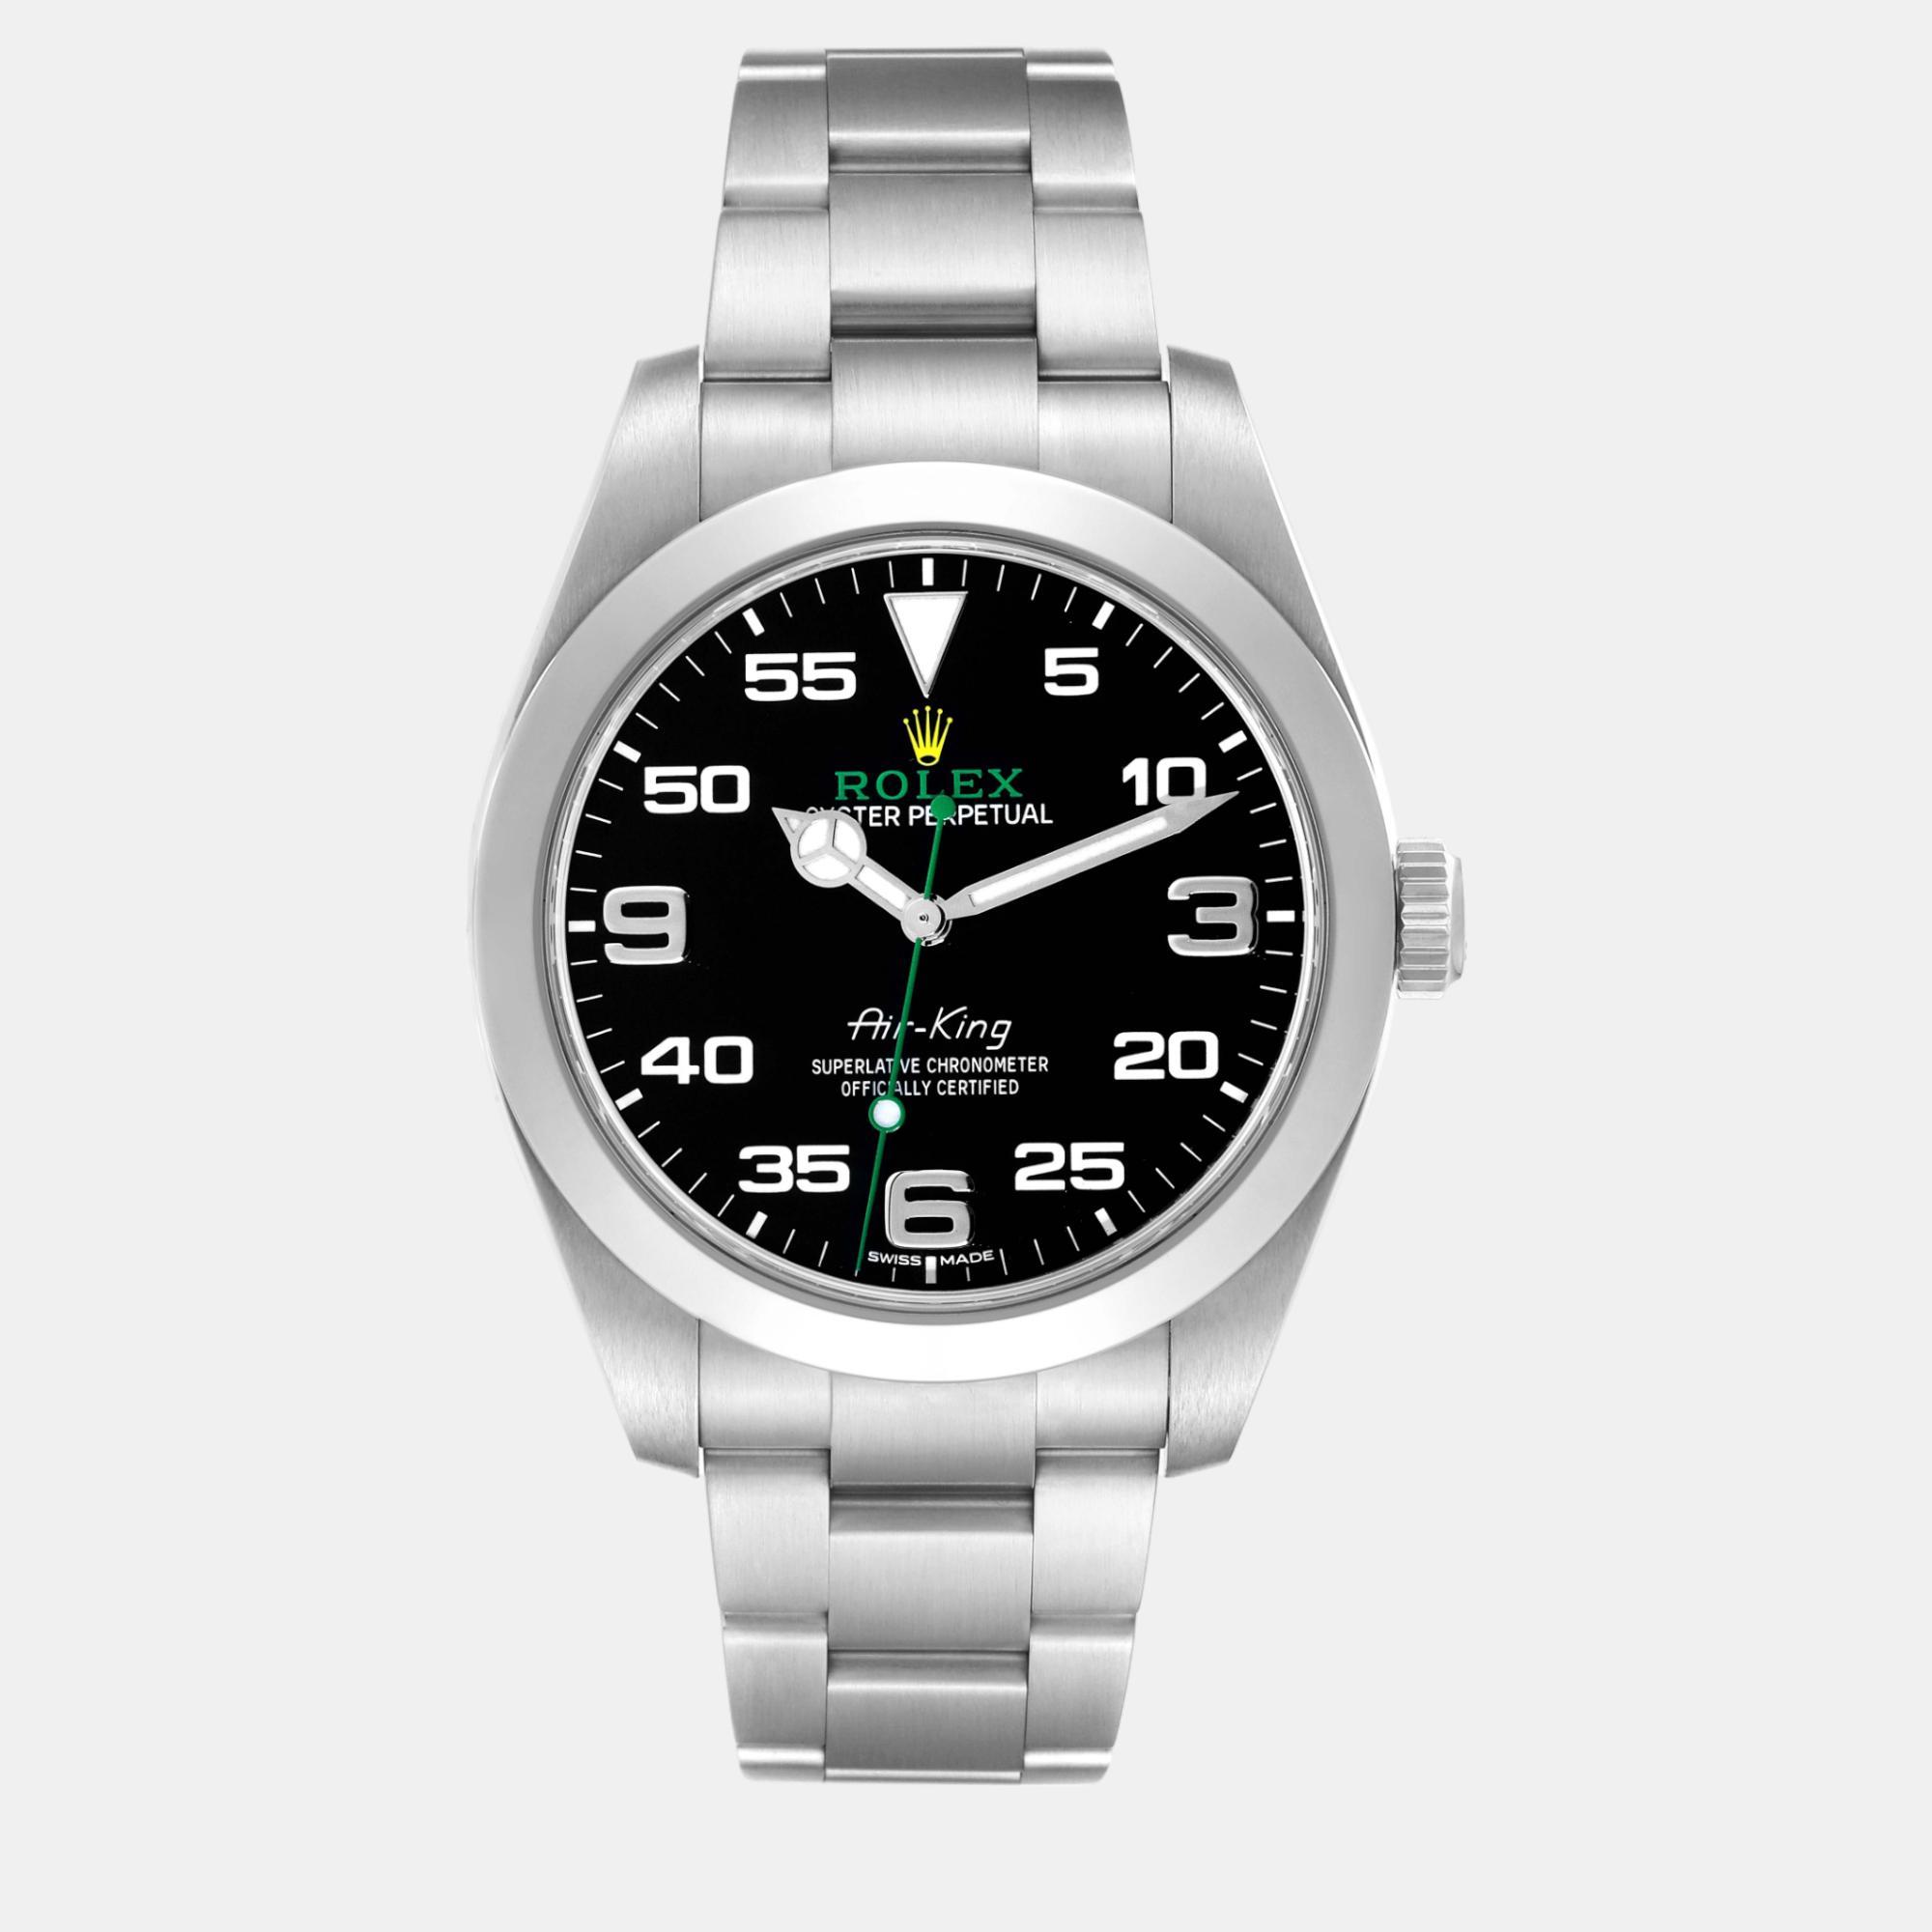 Rolex oyster perpetual air king green hand steel men's watch 40 mm